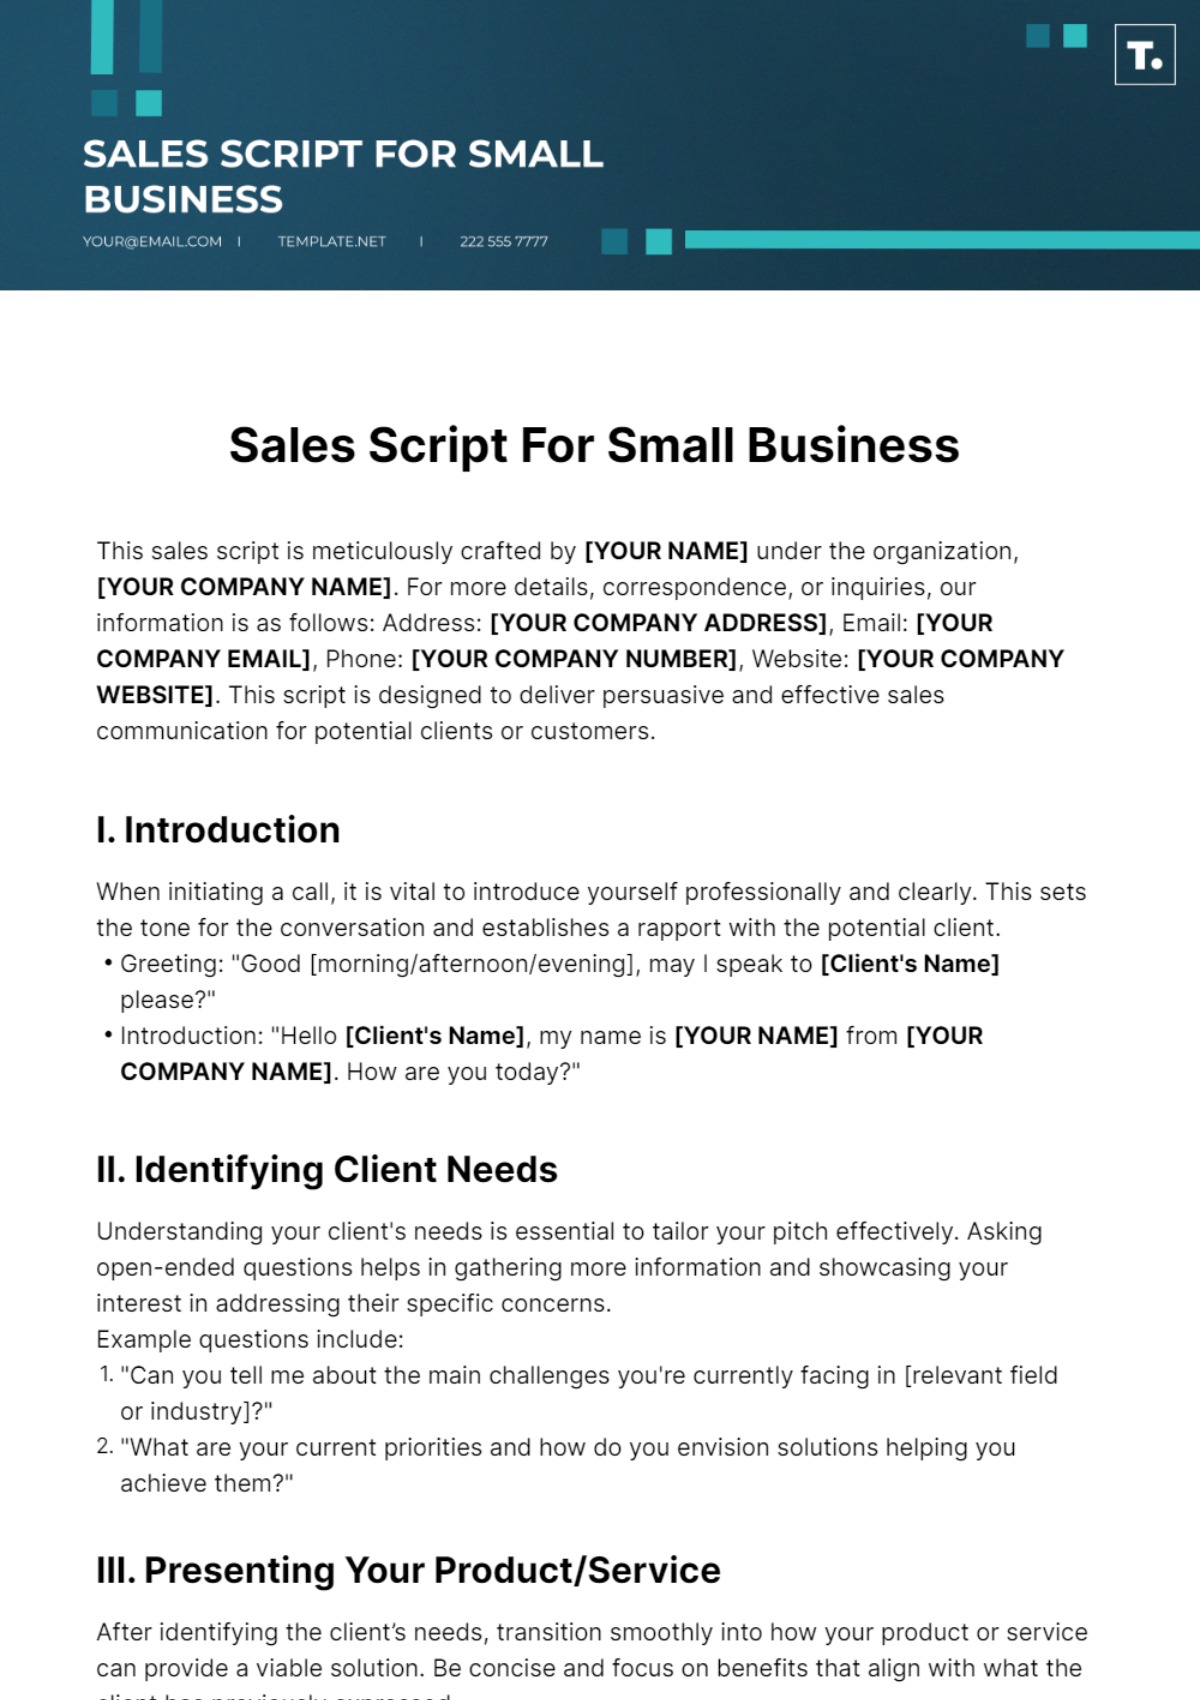 Sales Script For Small Business Template